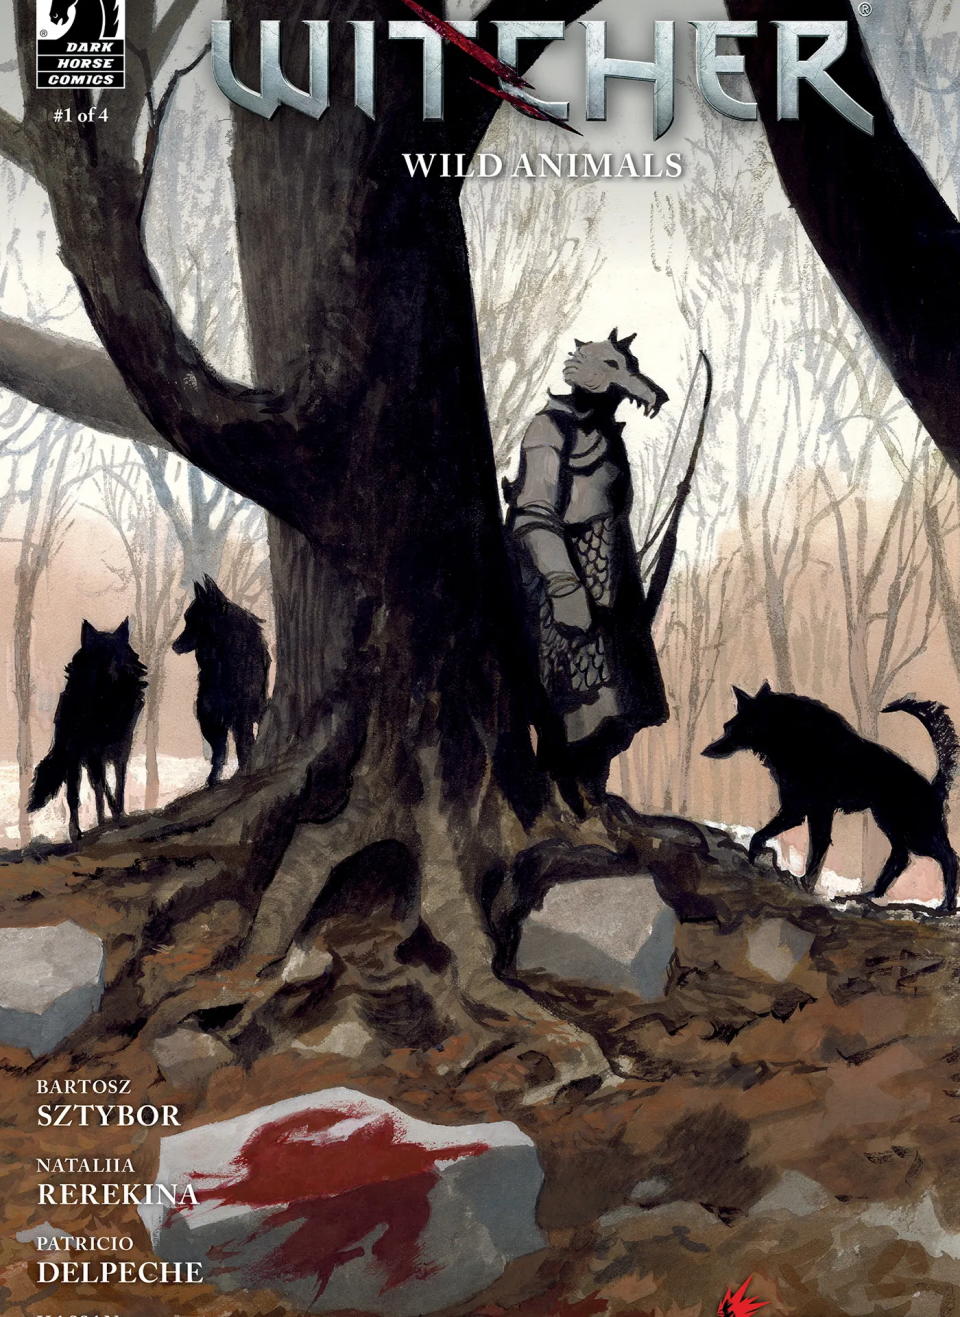 The Witcher: Wild Animals #1 cover art